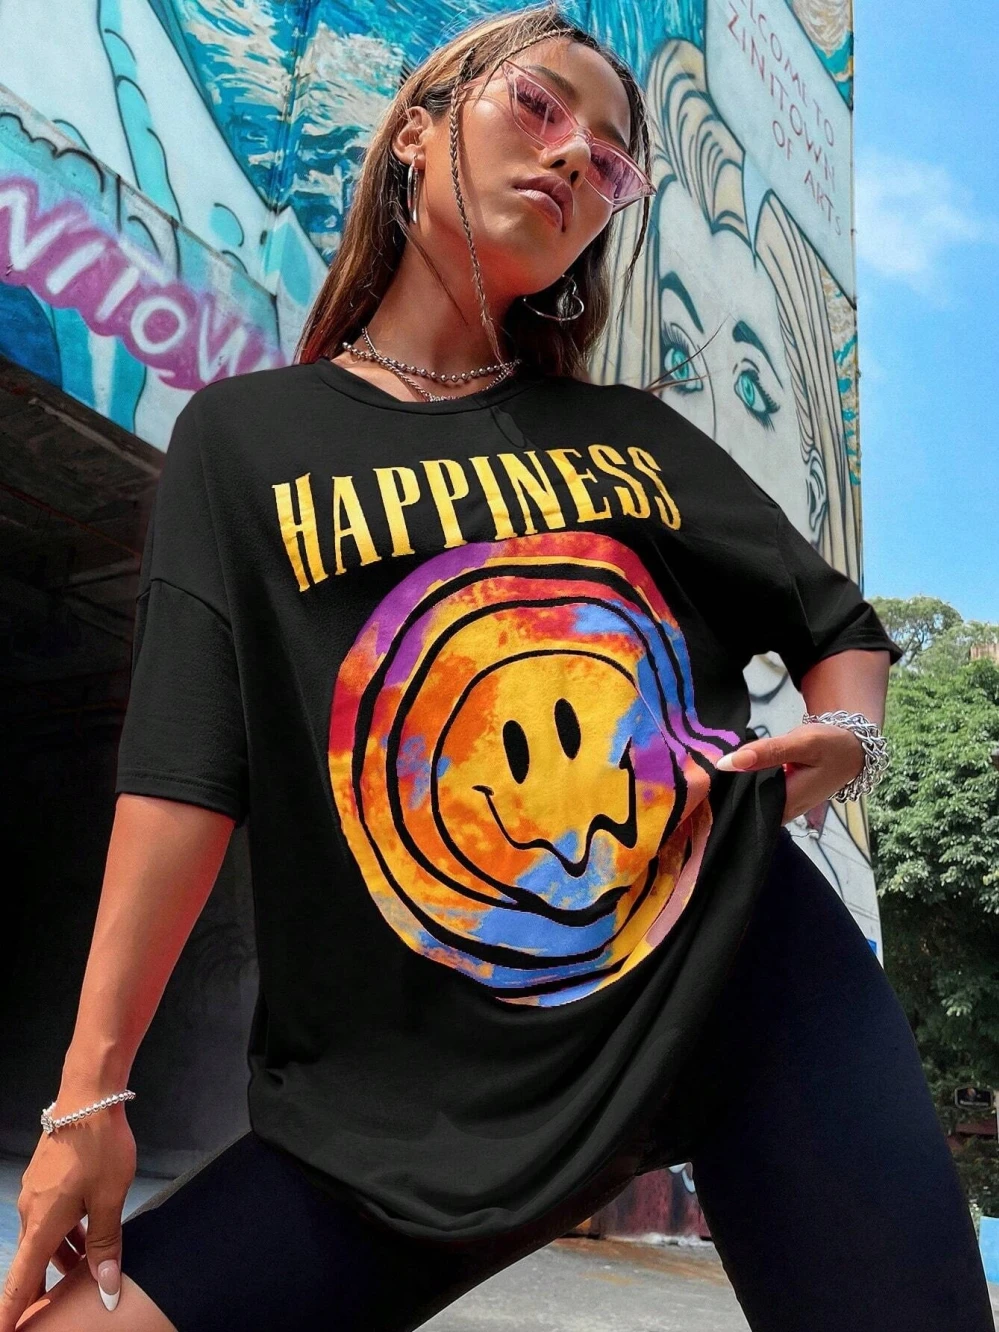 Happiness Colorful Smiling Face Funny Graphic T-Shirt Women Oversized Cotton Tshirts Soft Cool Clothing Cool Casual Short Sleeve